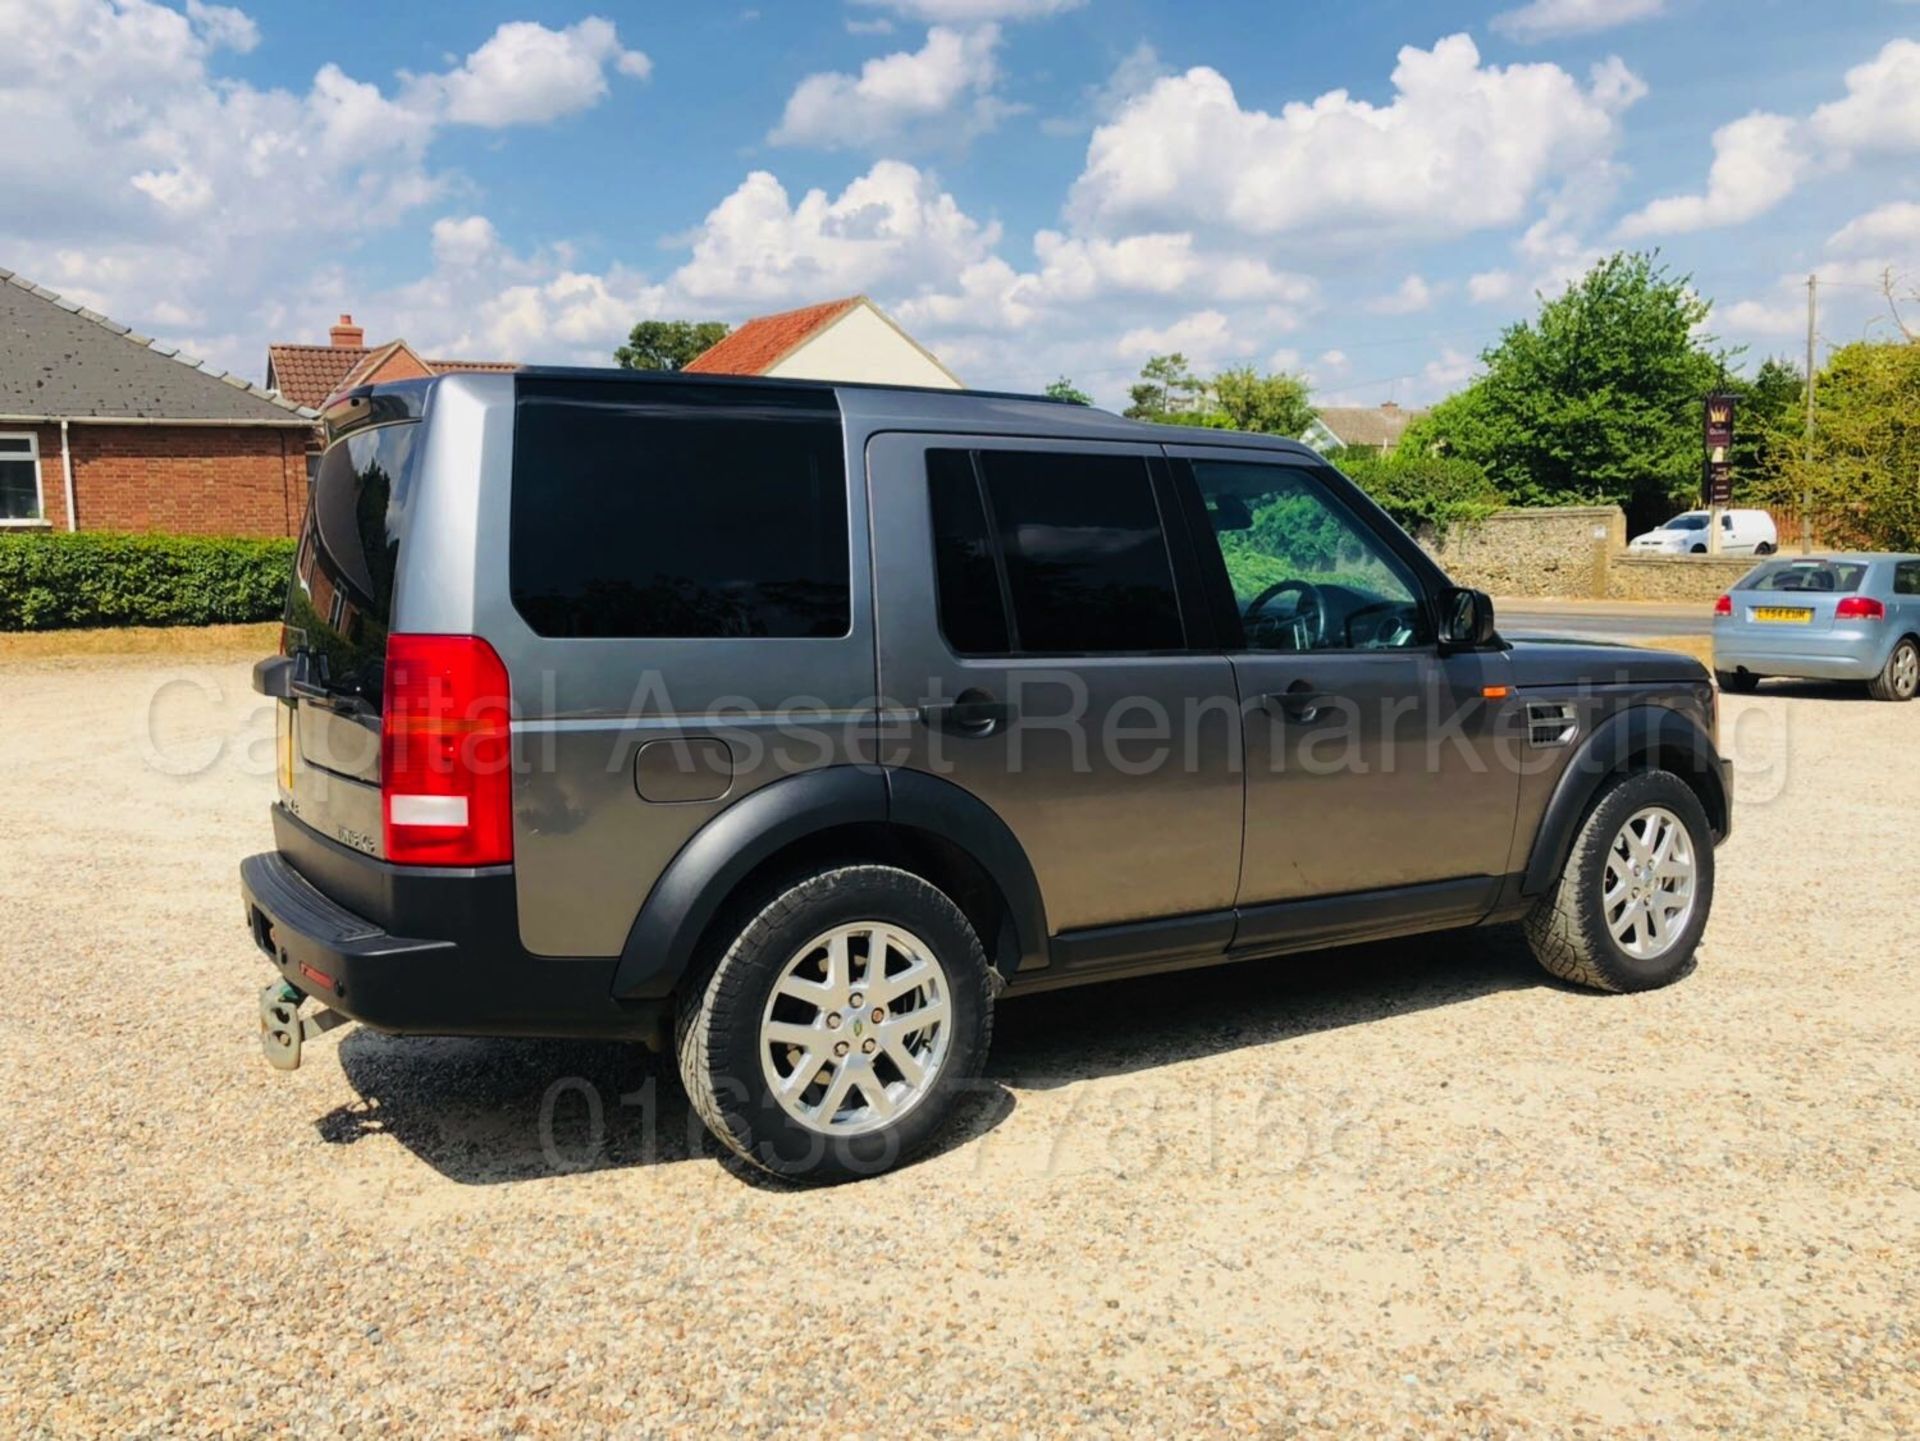 (On Sale) LAND ROVER DISCOVERY 3 'XS EDITION' **COMMERCIAL VAN**(2008 MODEL) 'TDV6-190 BHP' (NO VAT) - Image 9 of 37